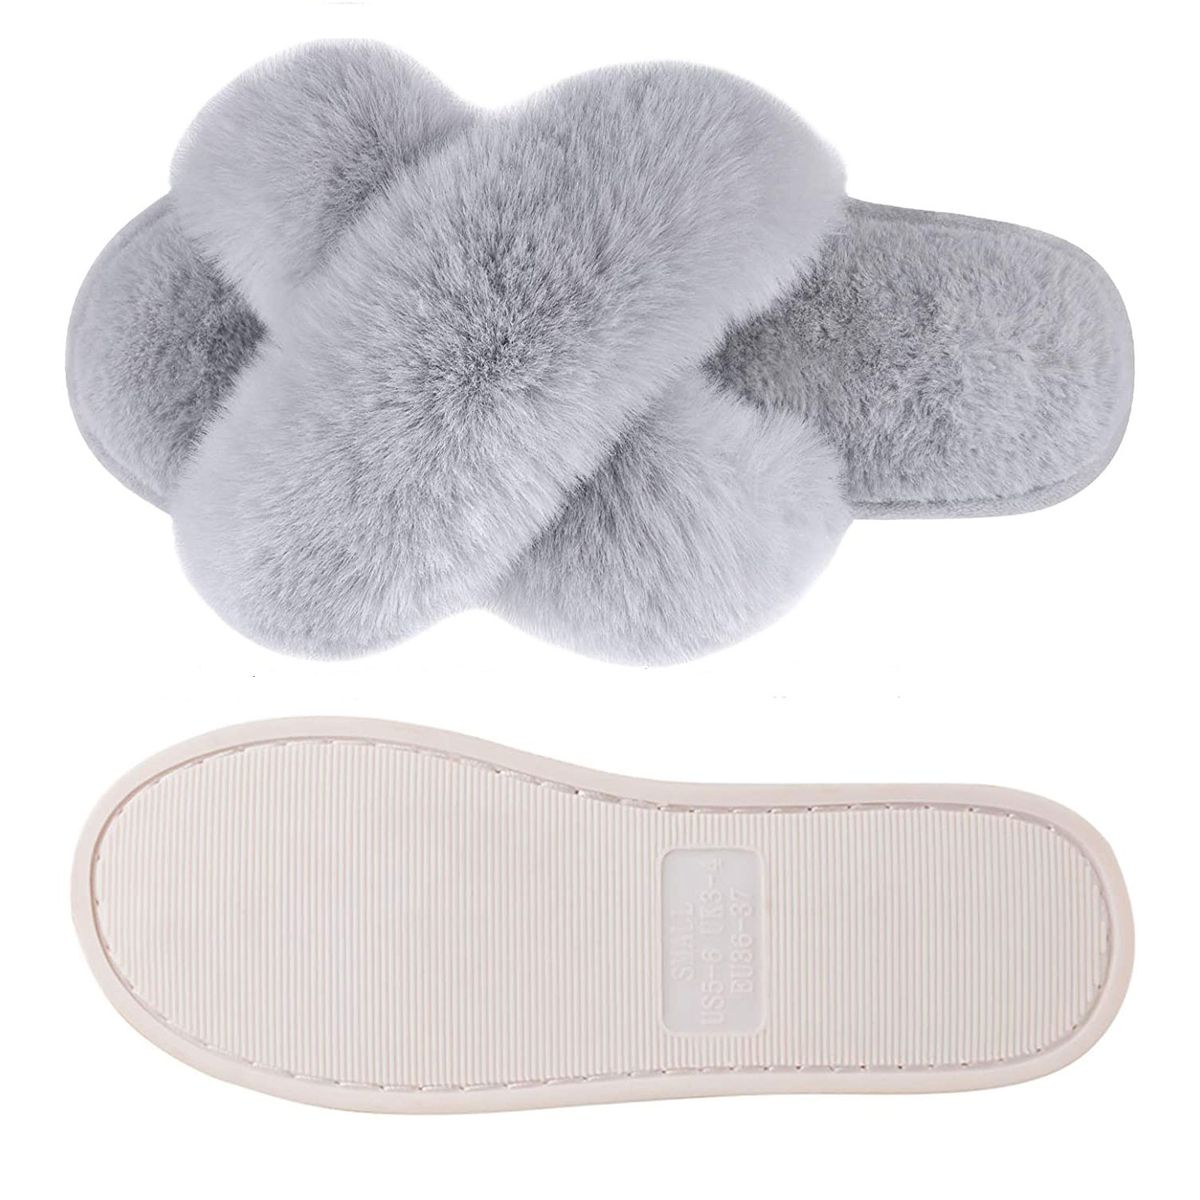 Parlovable slippers